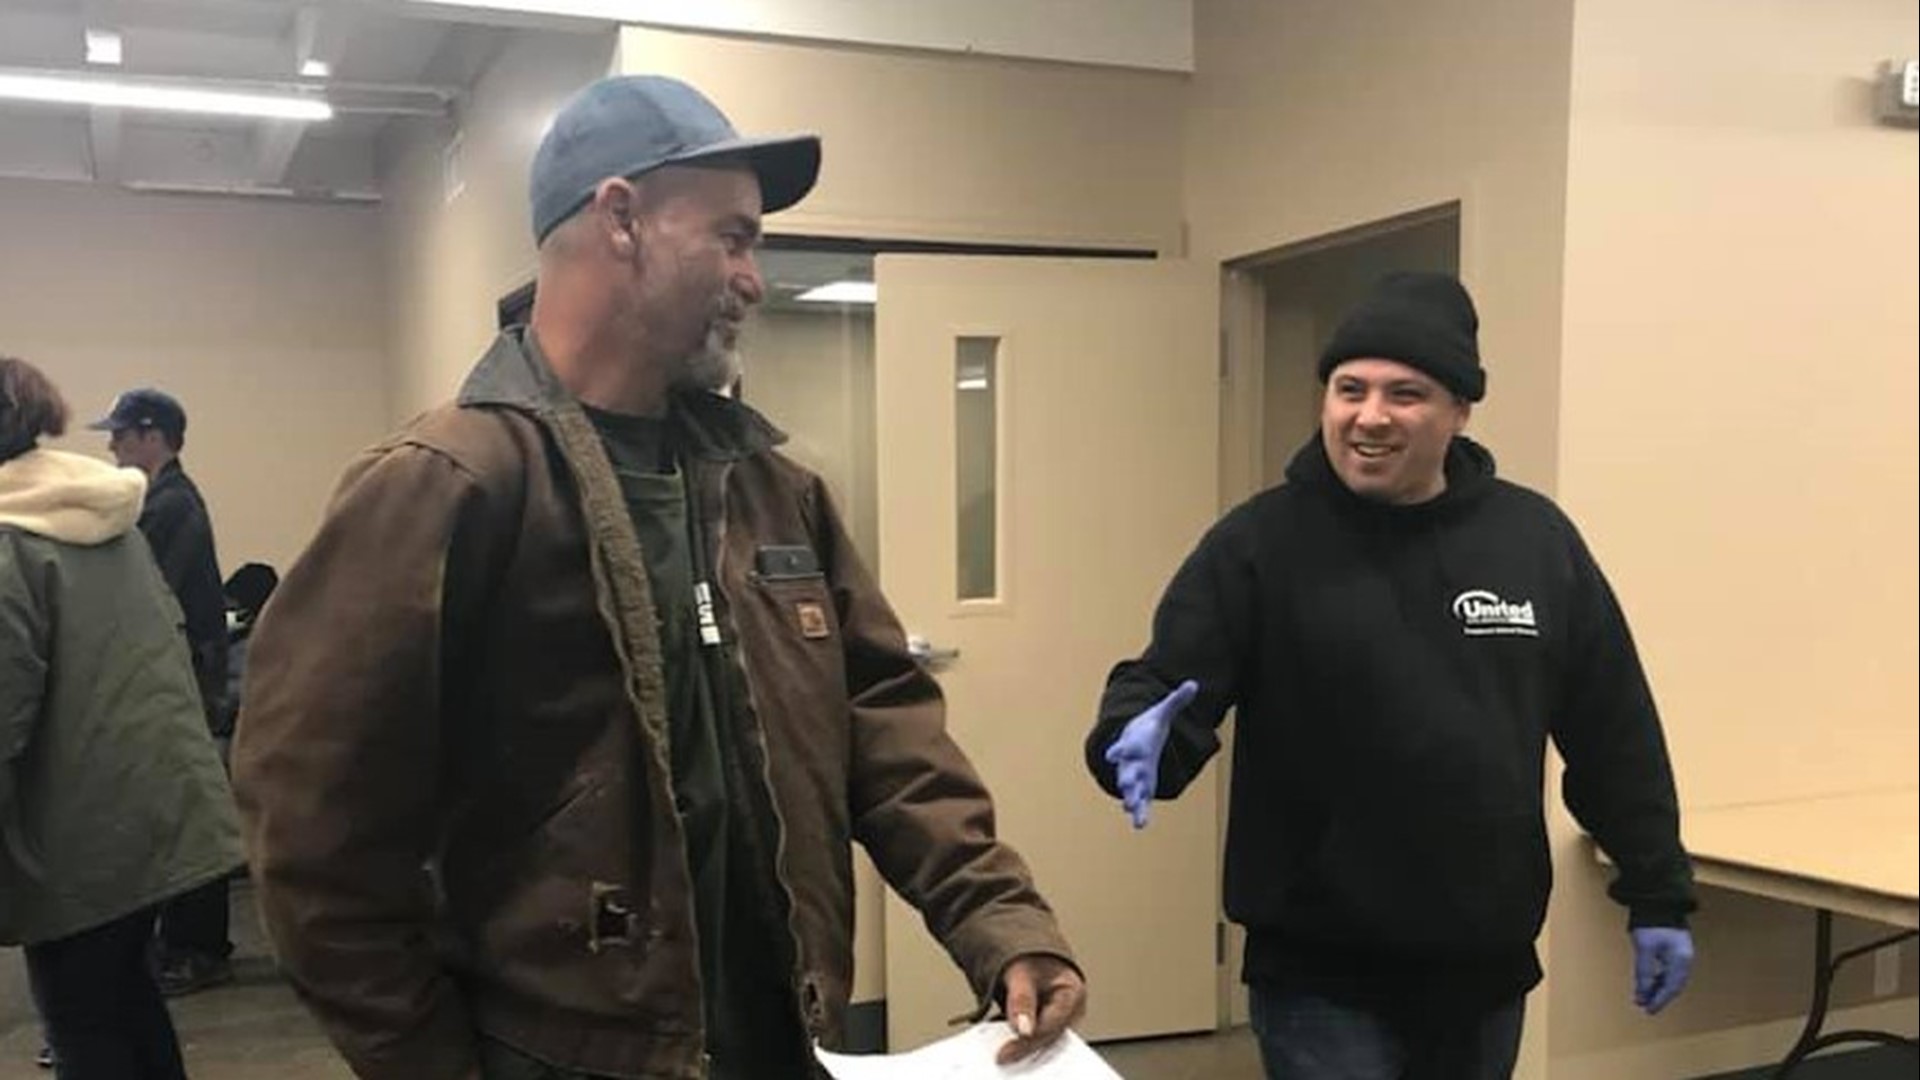 After months of planning and more than a week of delays, Modesto's new 182-bed Access Center Emergency Shelter at the Salvation Army is open for its first night.